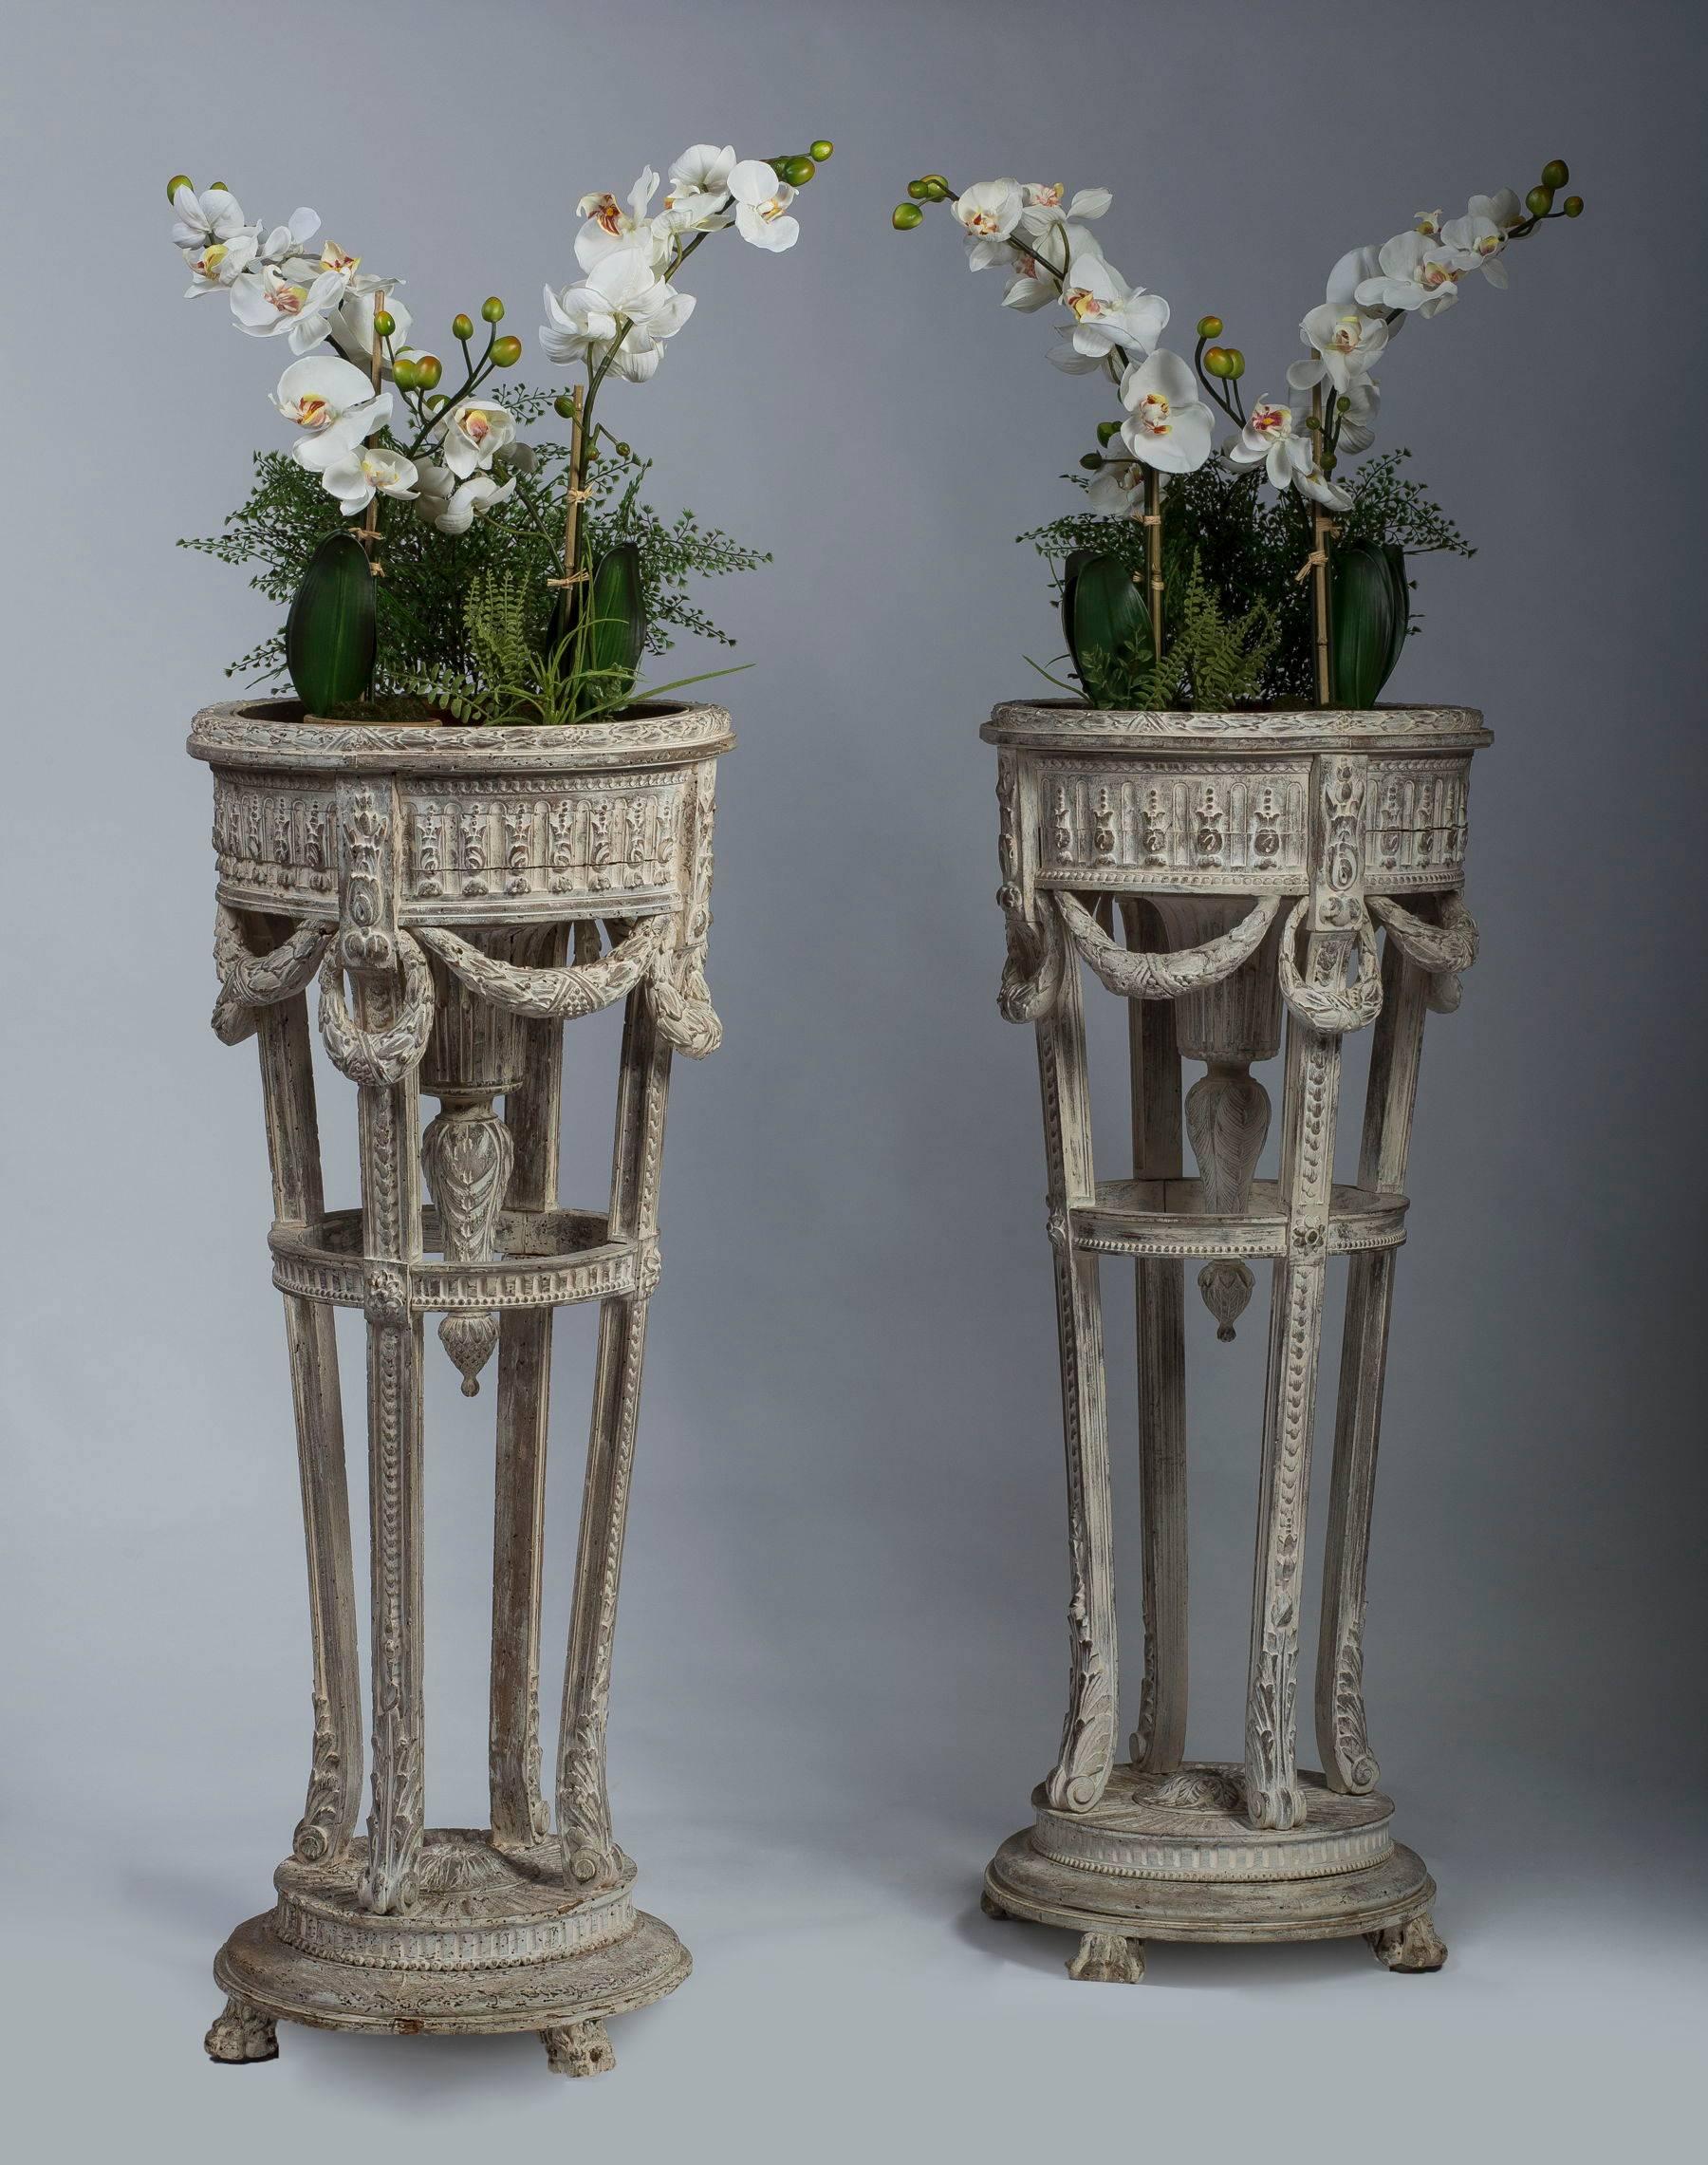 The circular container carved with pearls and rinceaux and supported by an inswept strung-piaster quadripartite stand with a central finial and hung with swags raised on a conforming plinth. This stunning pair is very much evocative of the designs